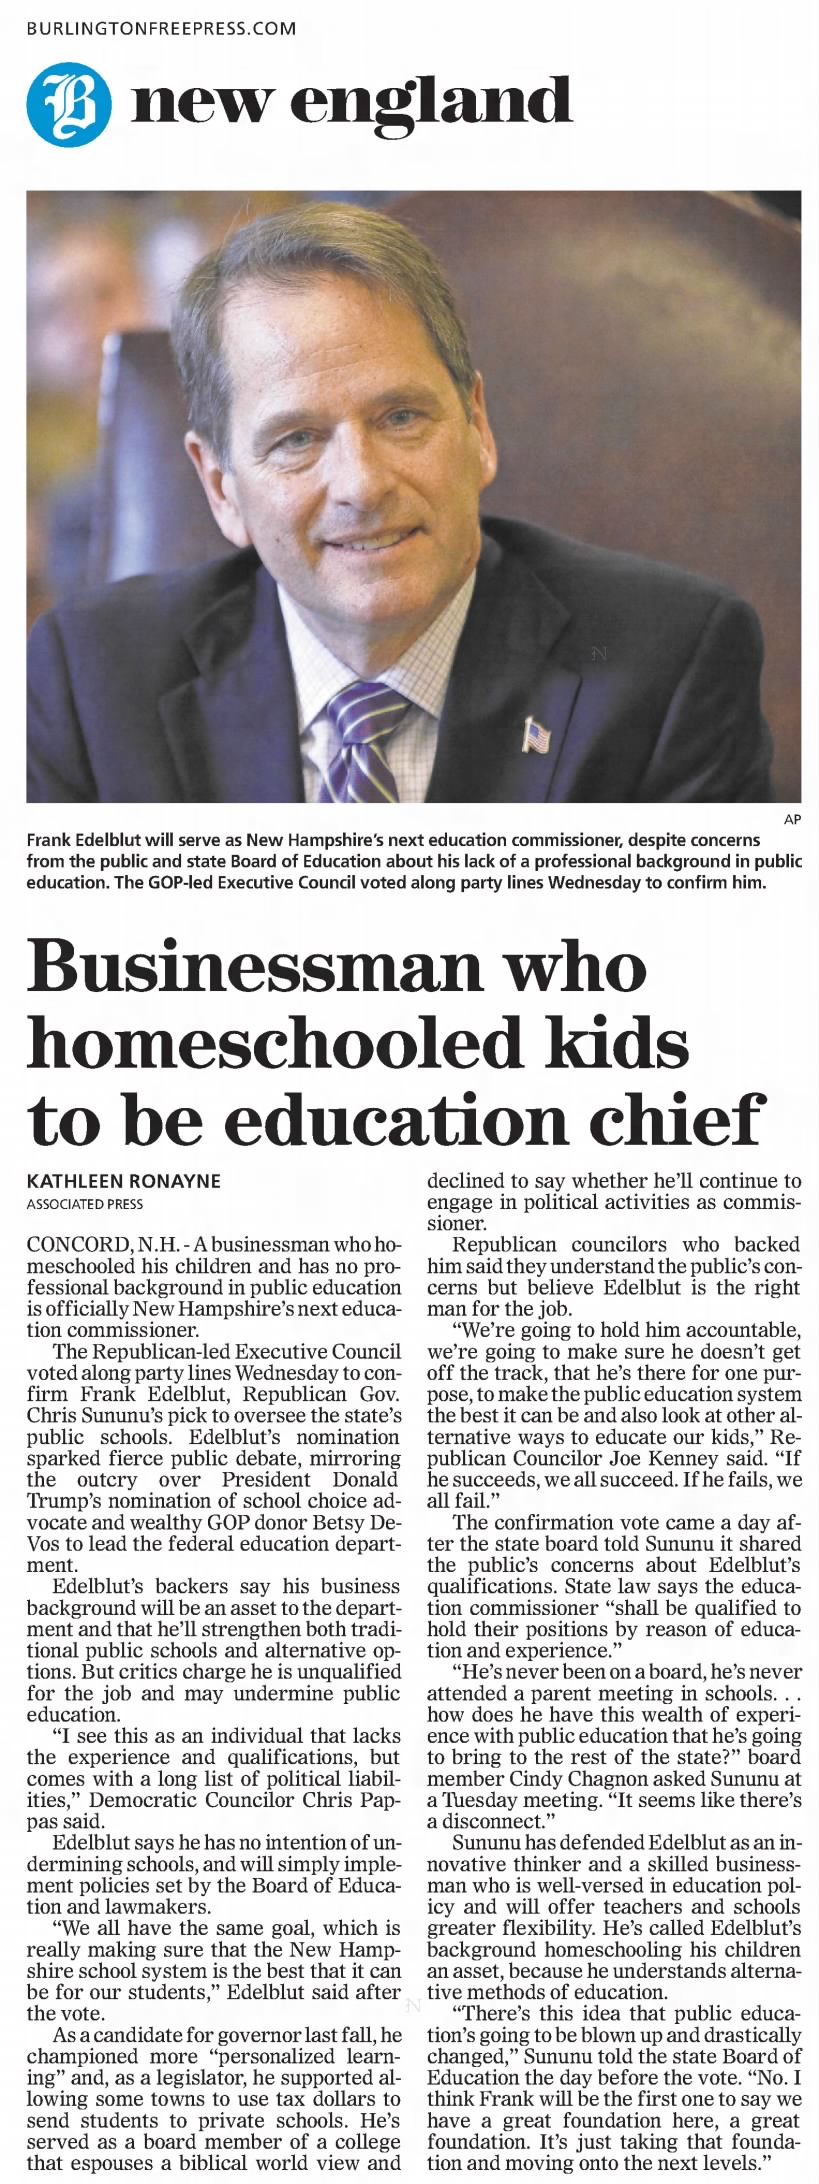 Businessman who homeschooled kids to be education chief